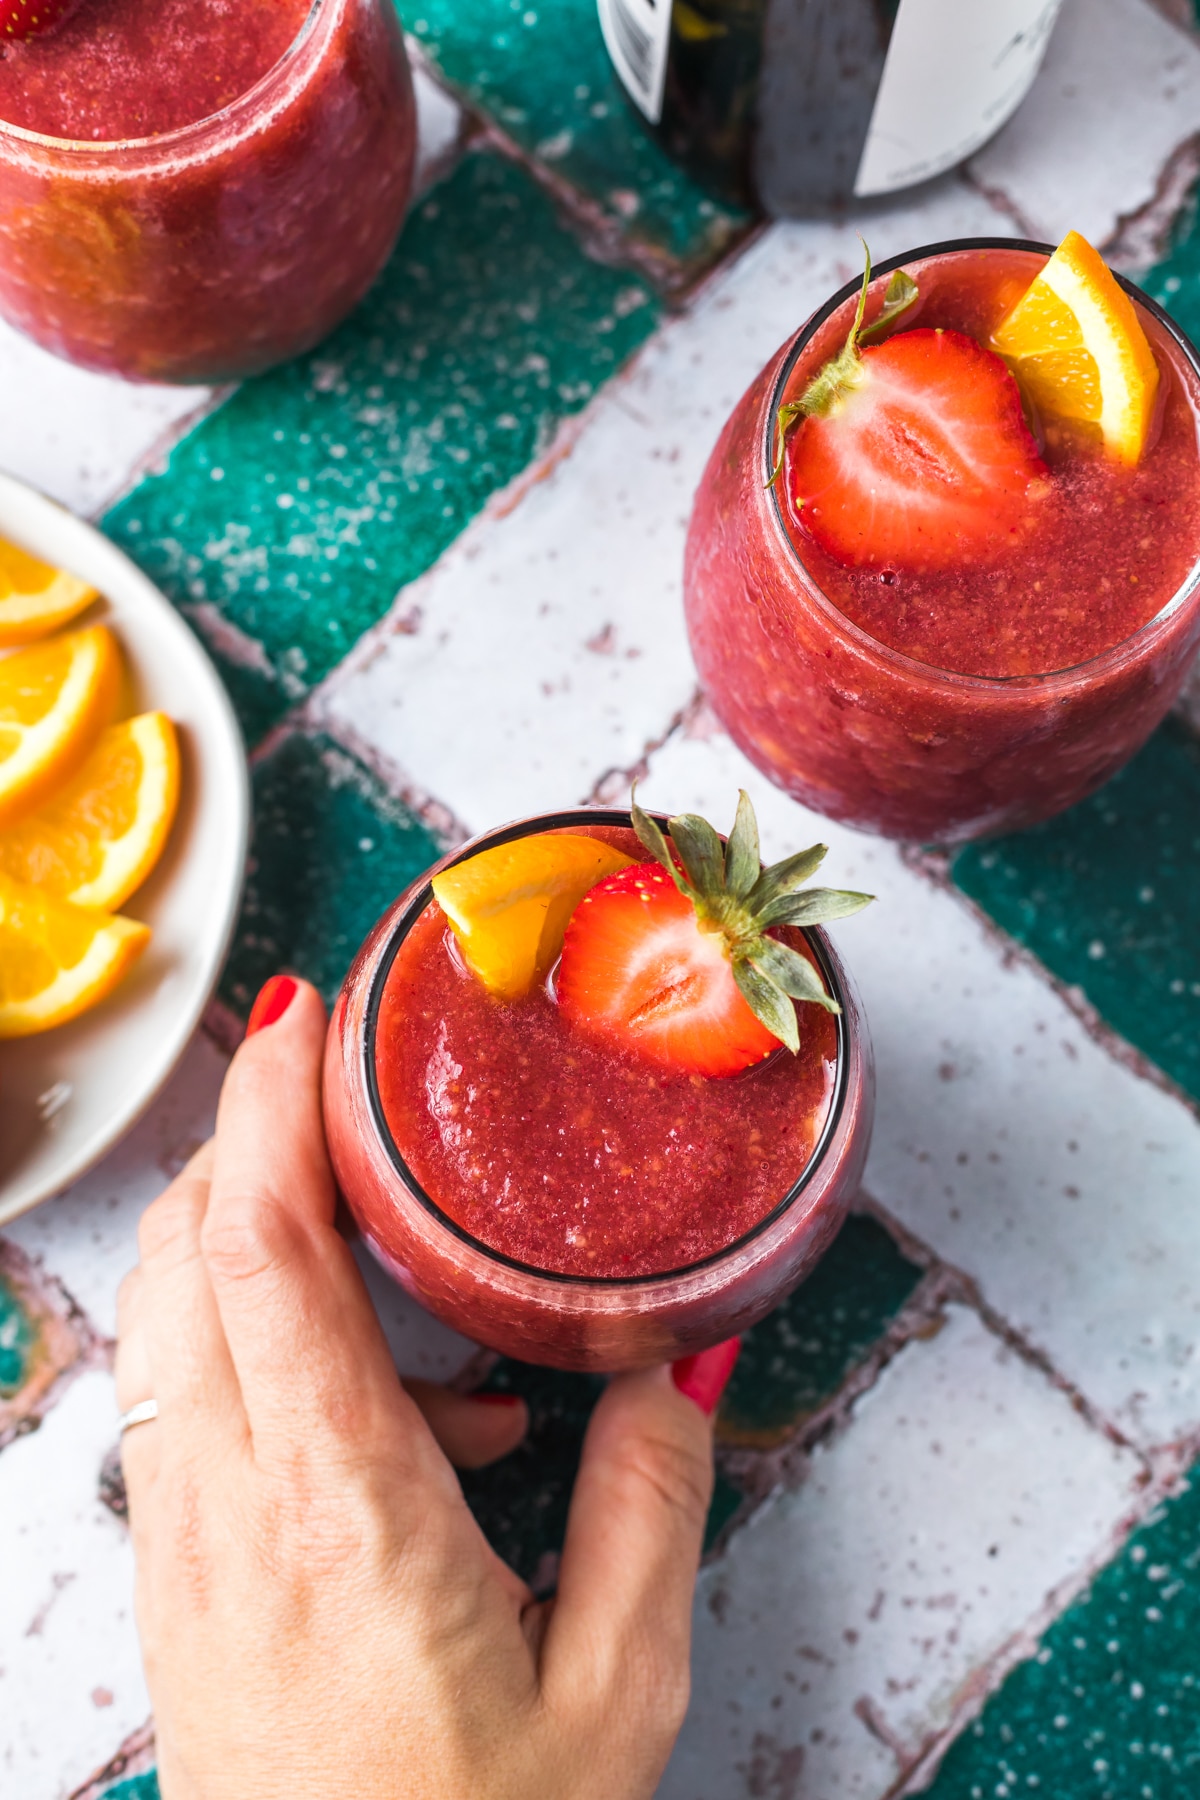 over head view of hand reaching for glass of frozen sangria with orange and strawberry slices, small plate with orange slices and second glass in view